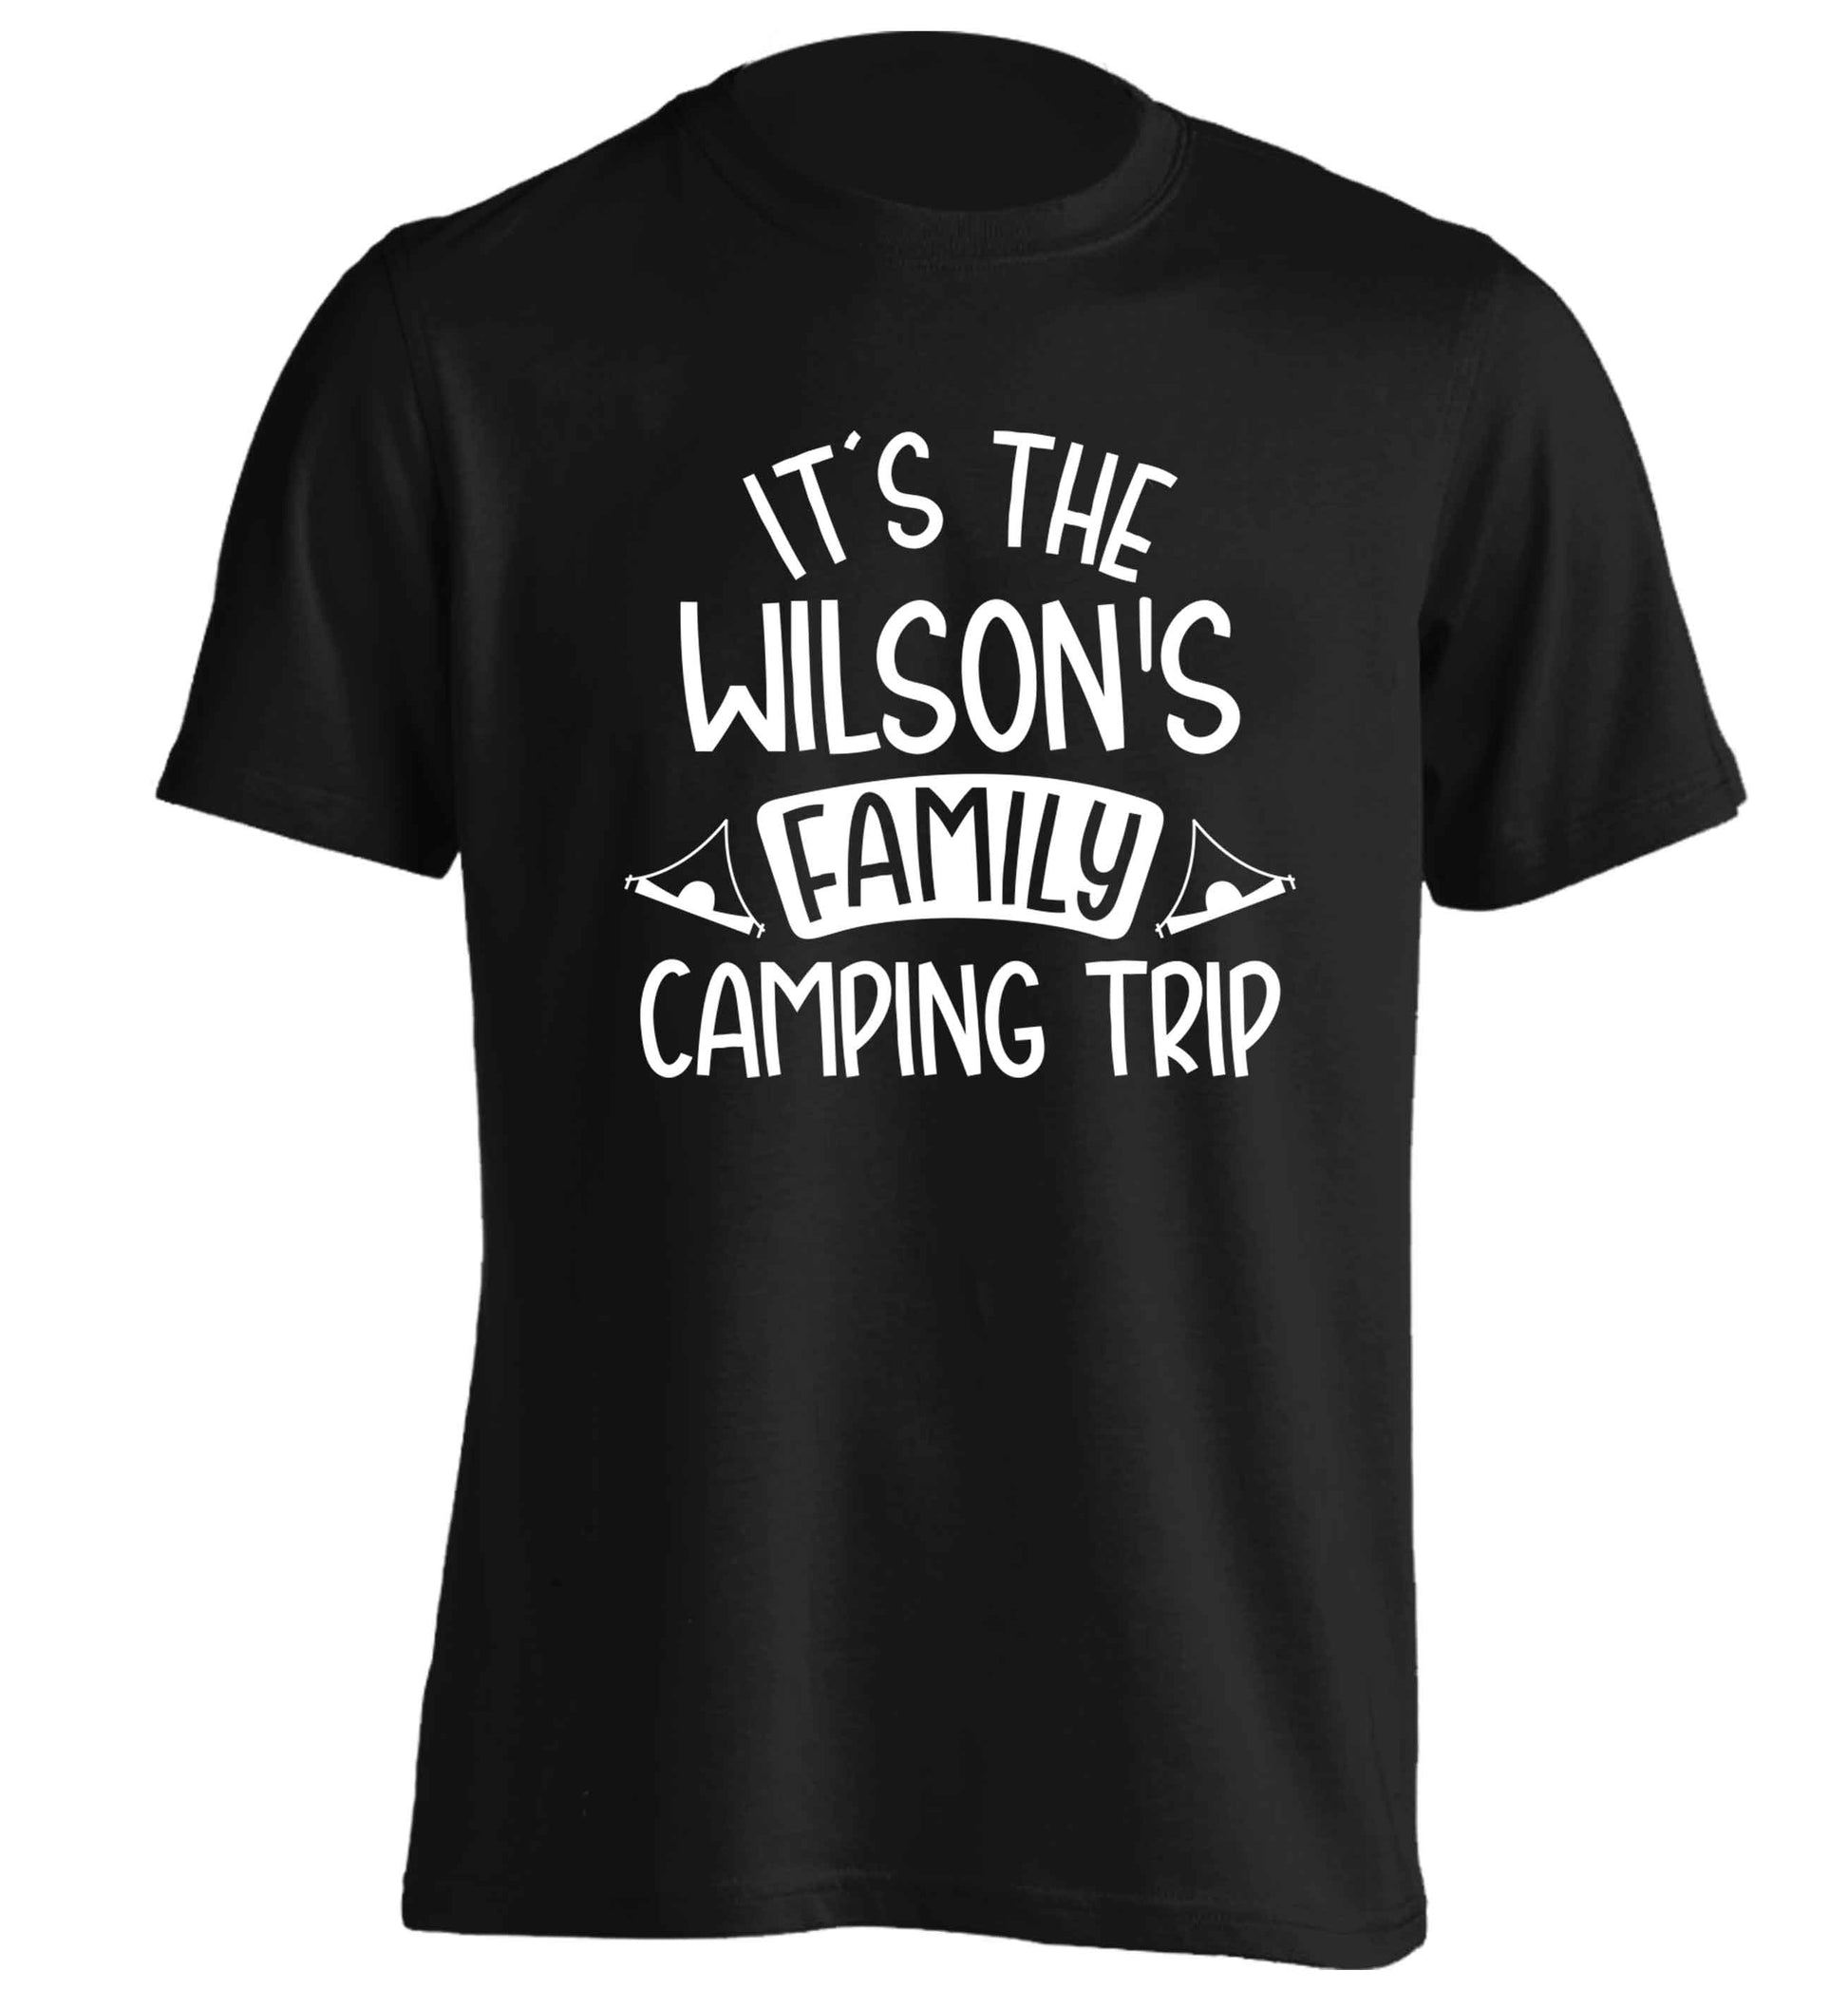 It's the Wilson's family camping trip personalised adults unisex black Tshirt 2XL